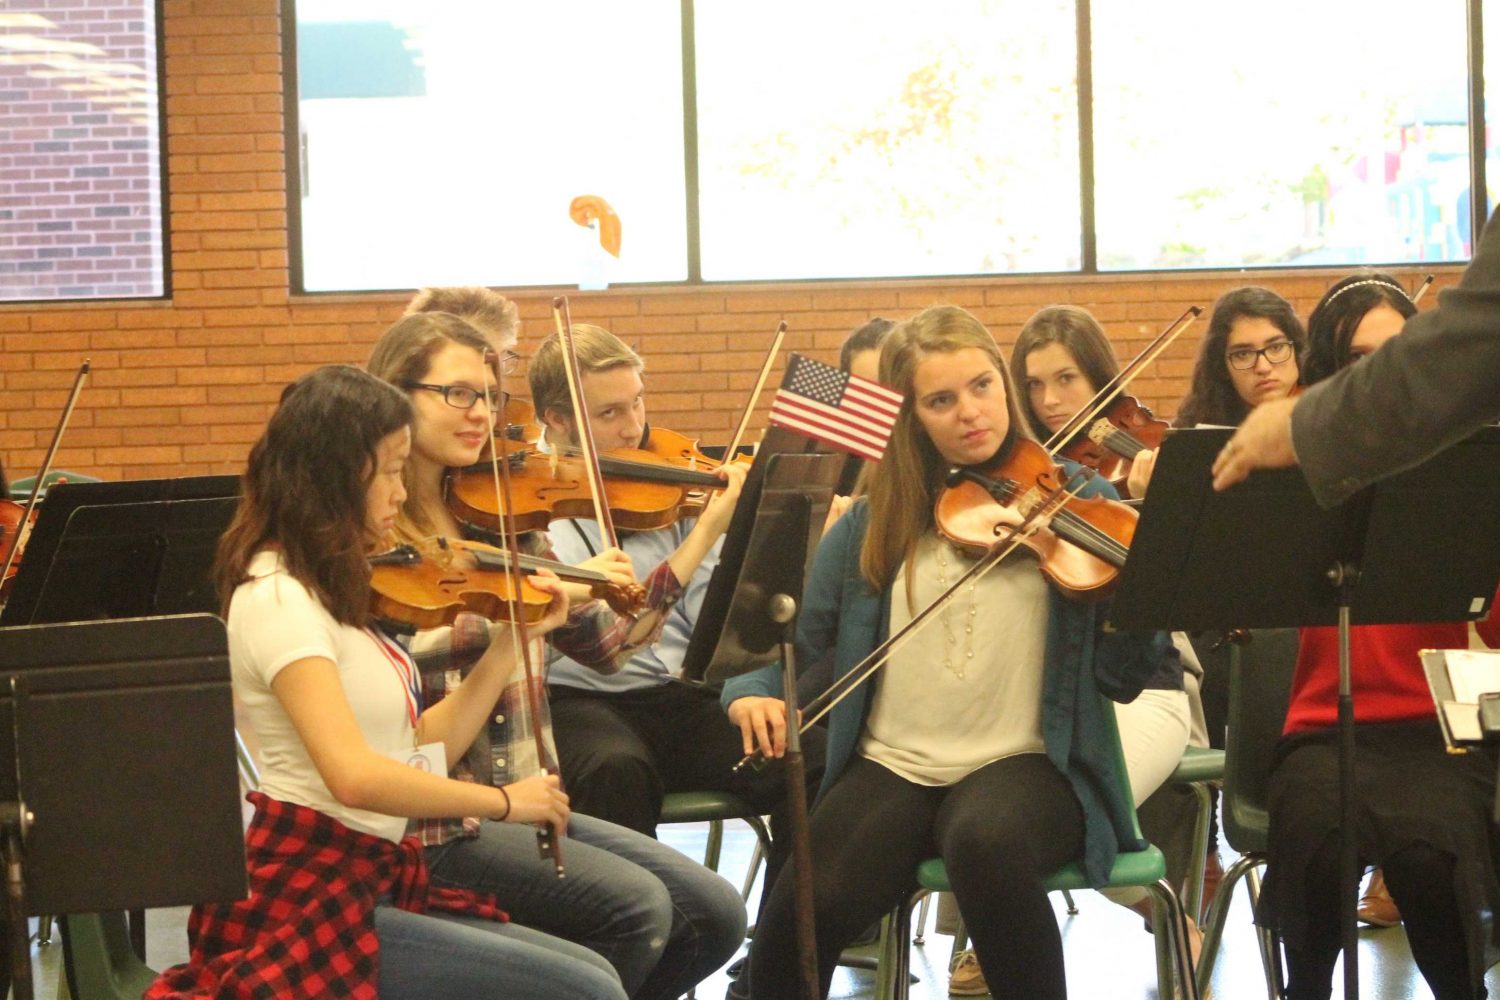 Winter-themed orchestra concert is Dec. 8 at 7 p.m.